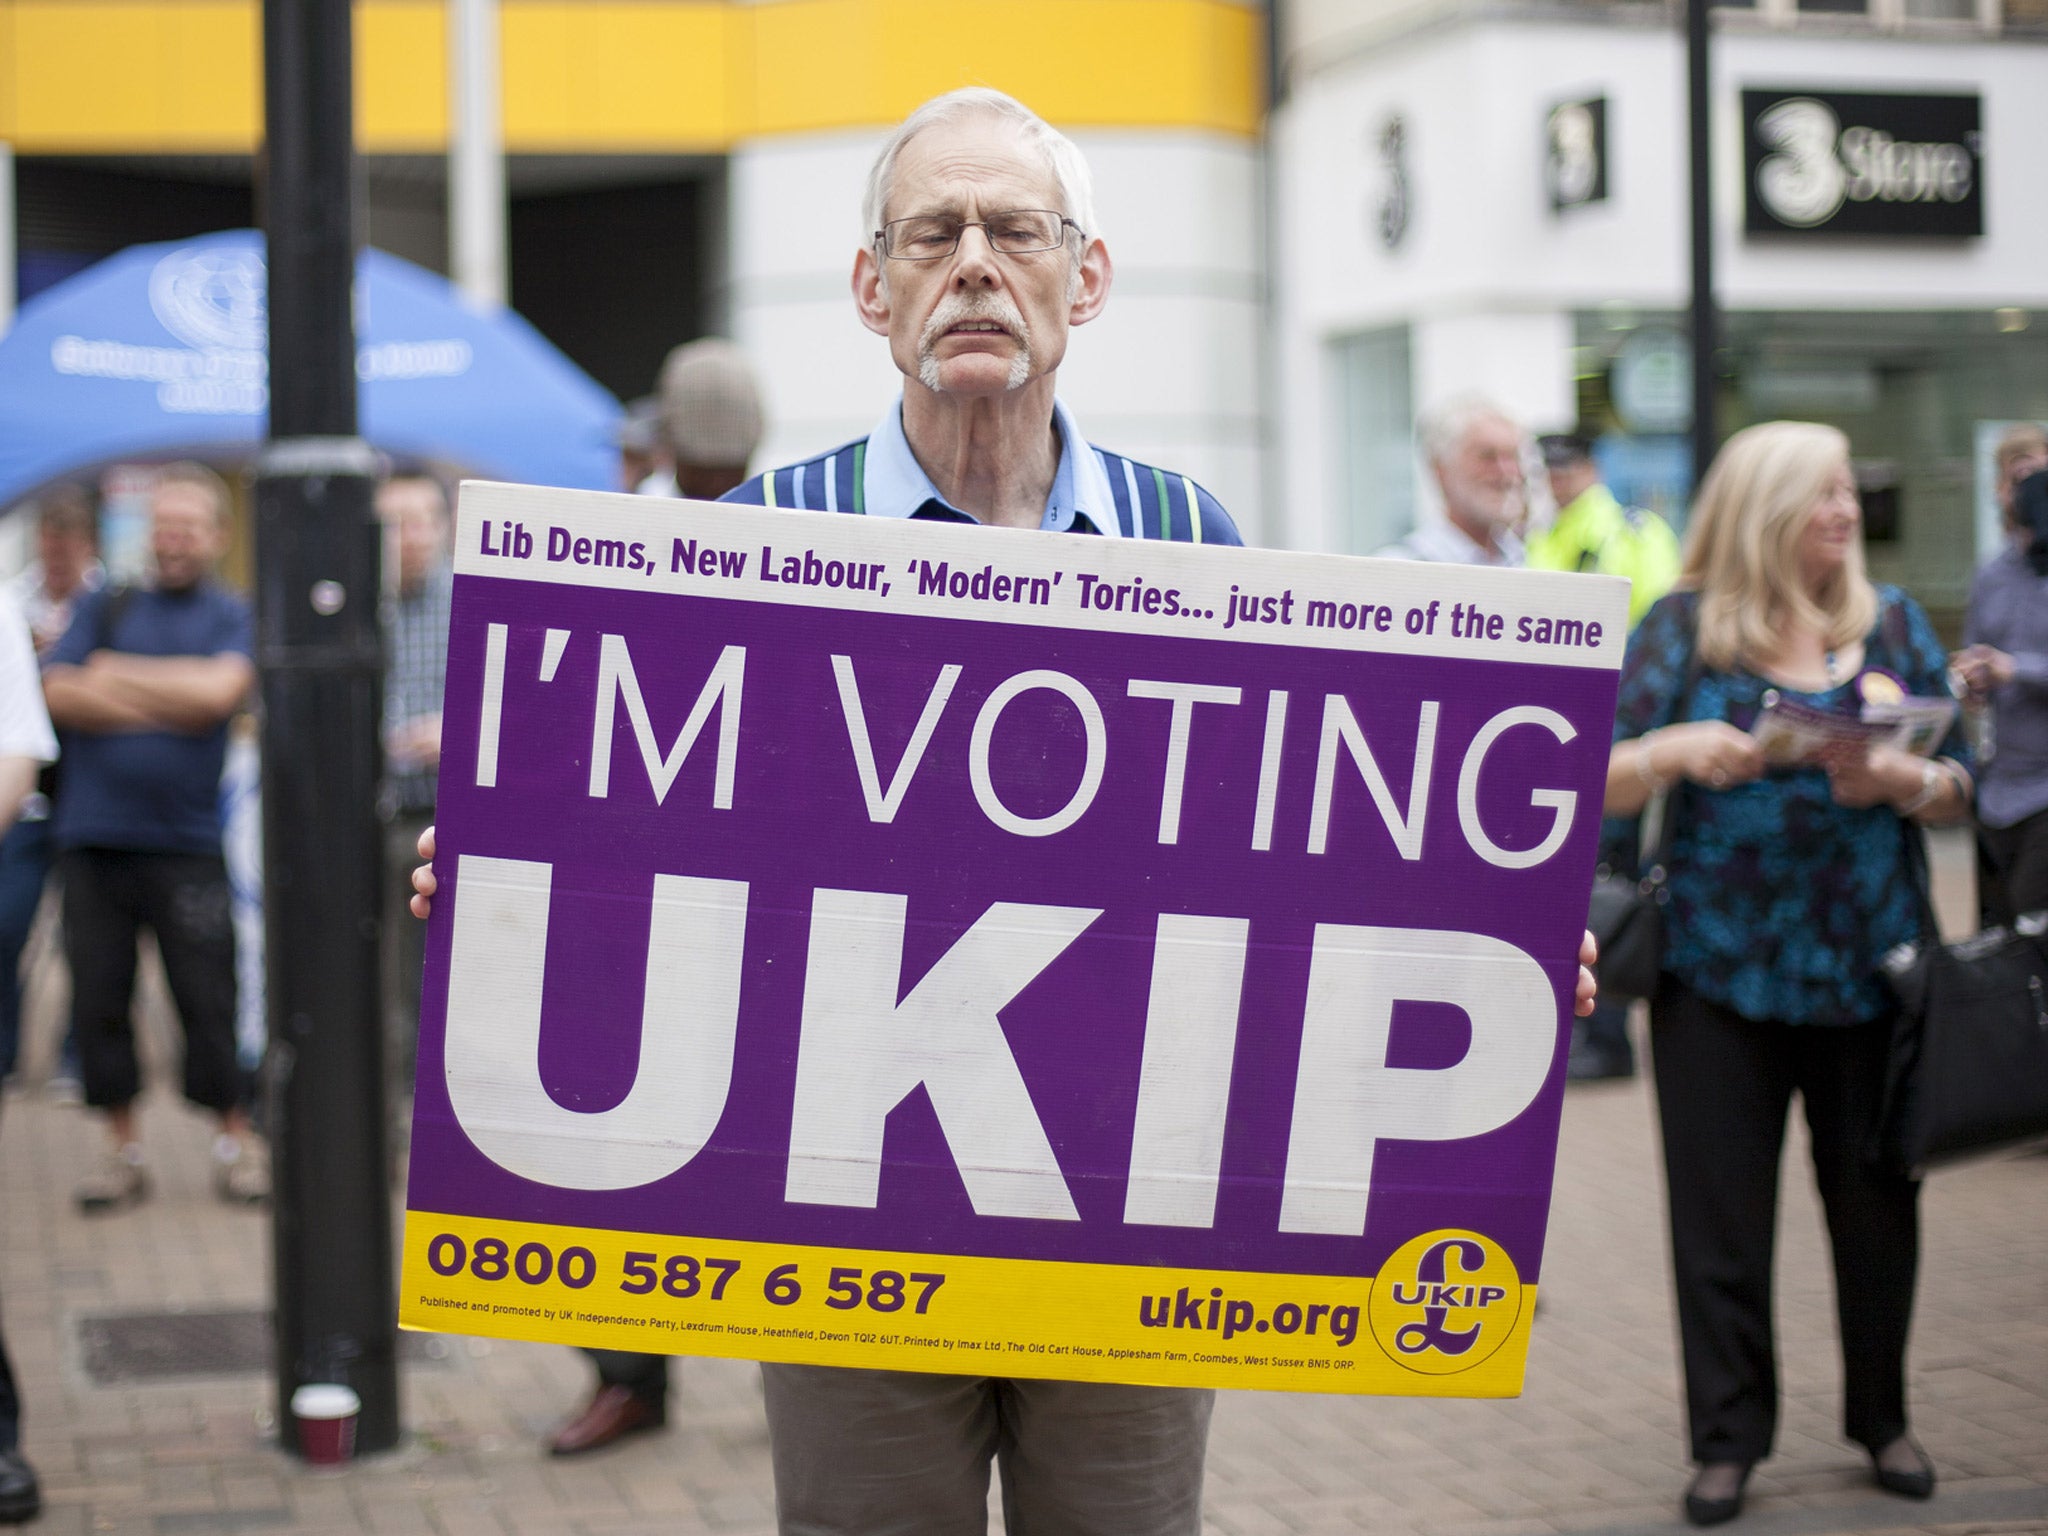 A Ukip supporter at a shopping centre in Croydon